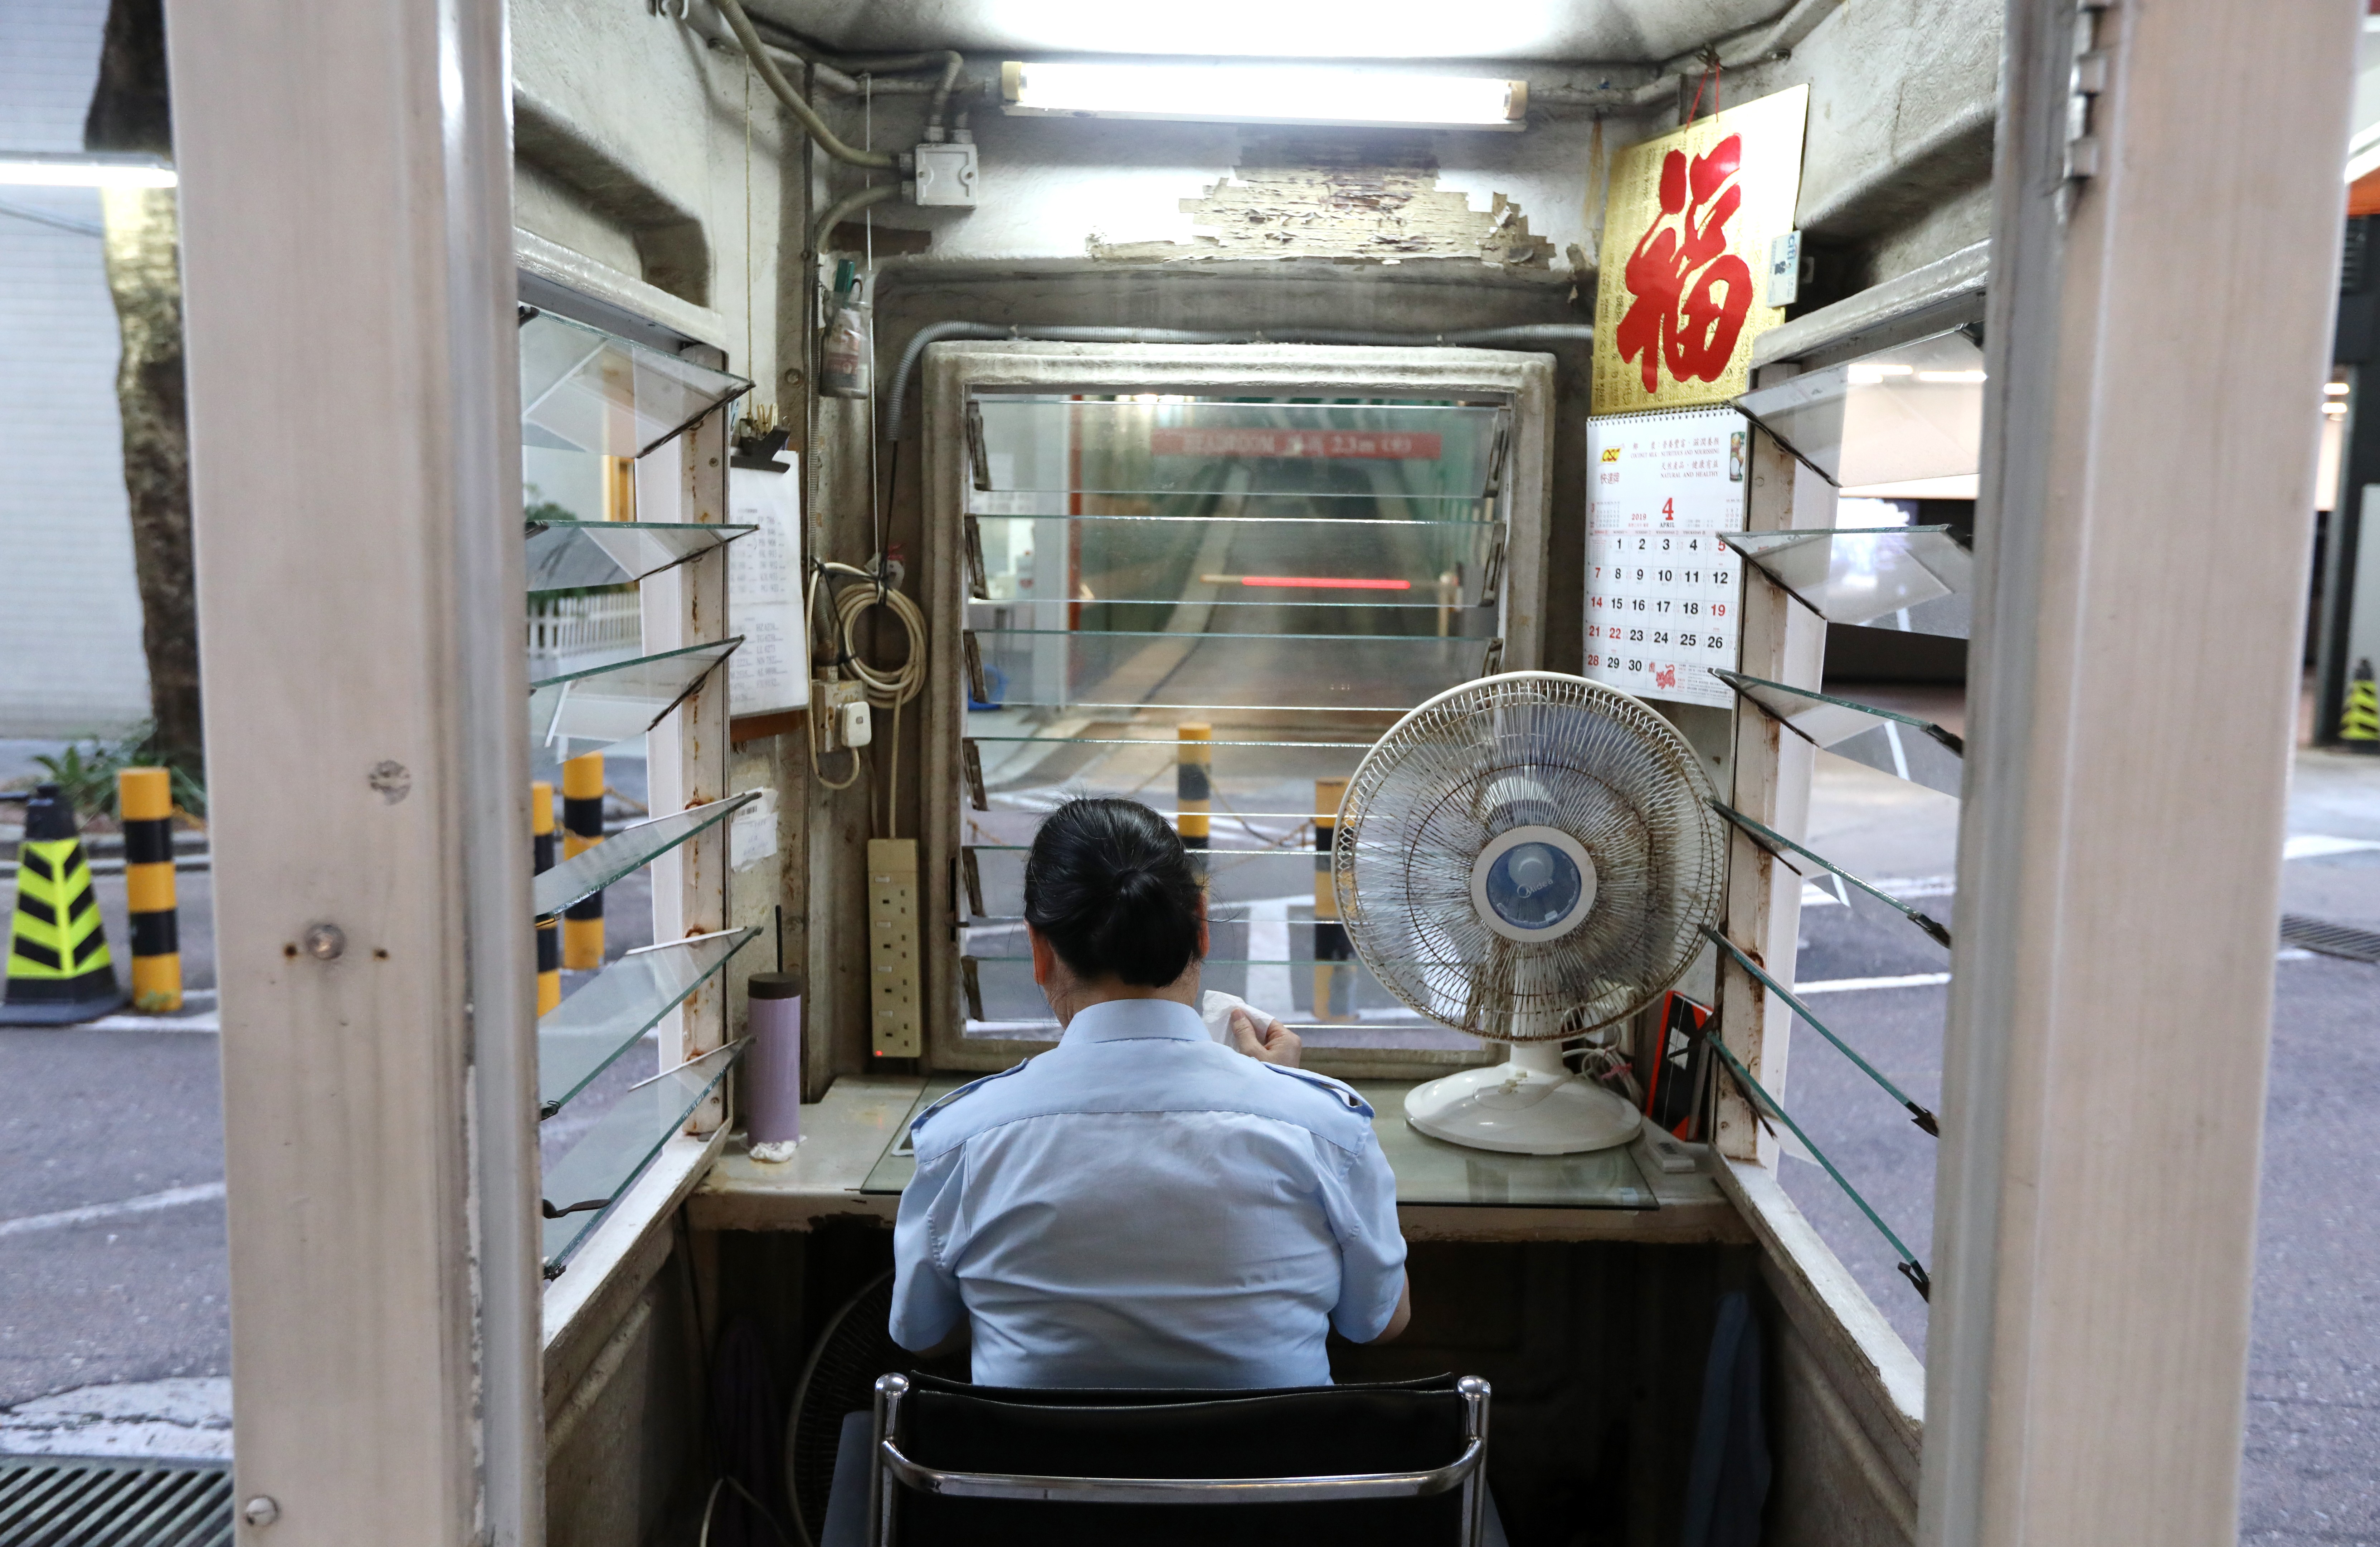 A security guard on duty at the Whampoa Estate in Hung Hom. Photo: Roy Issa